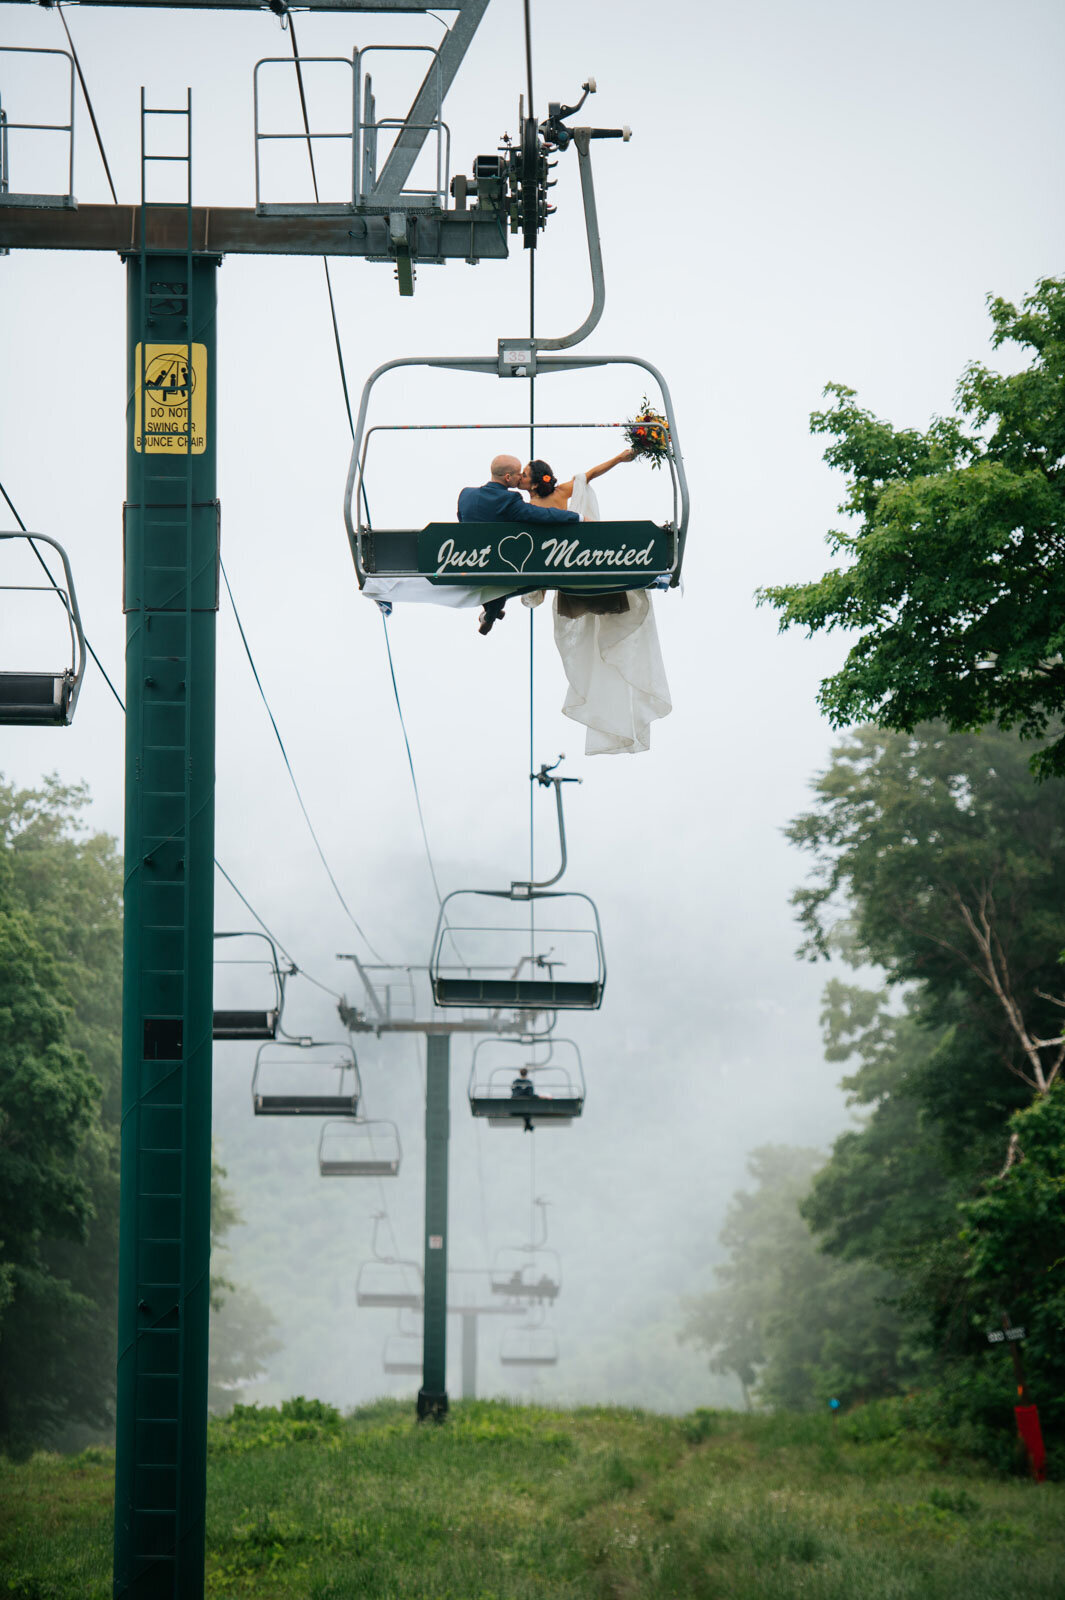 bride and groom riding on ski chairlift with just married sign at sugarbush resort wedding